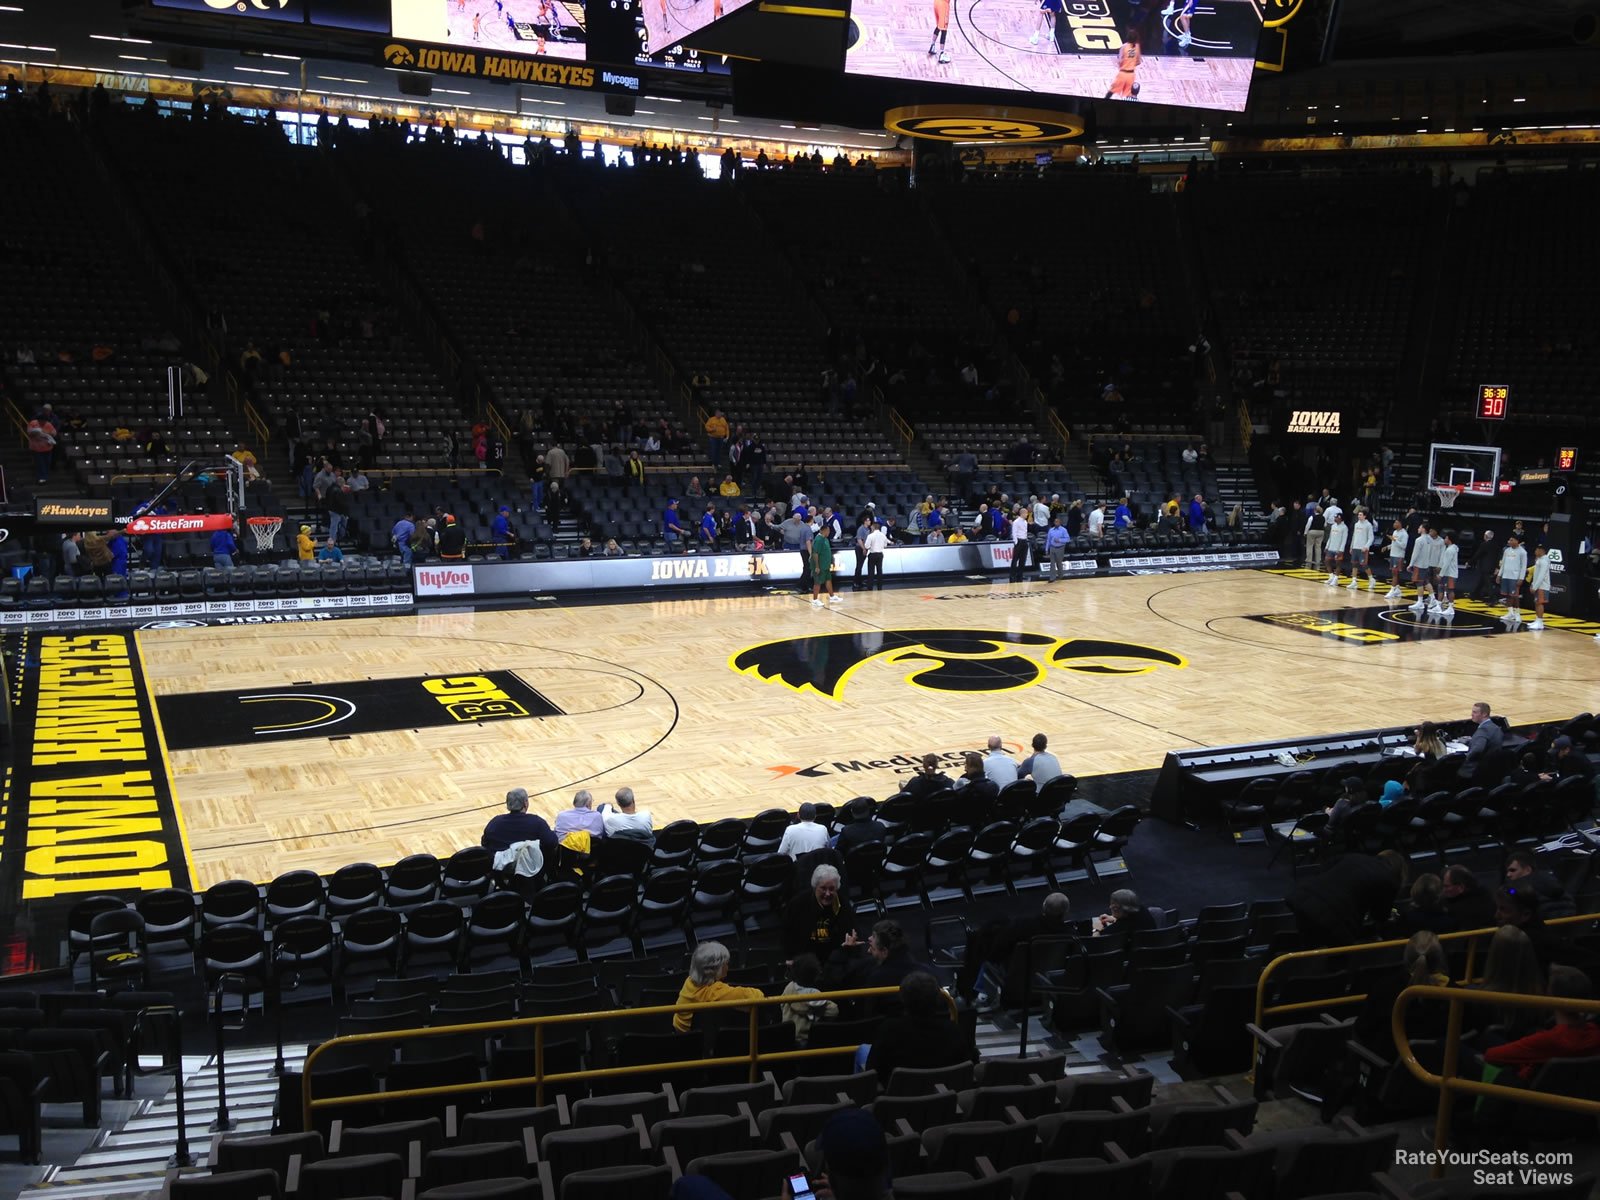 section m, row 15 seat view  - carver-hawkeye arena